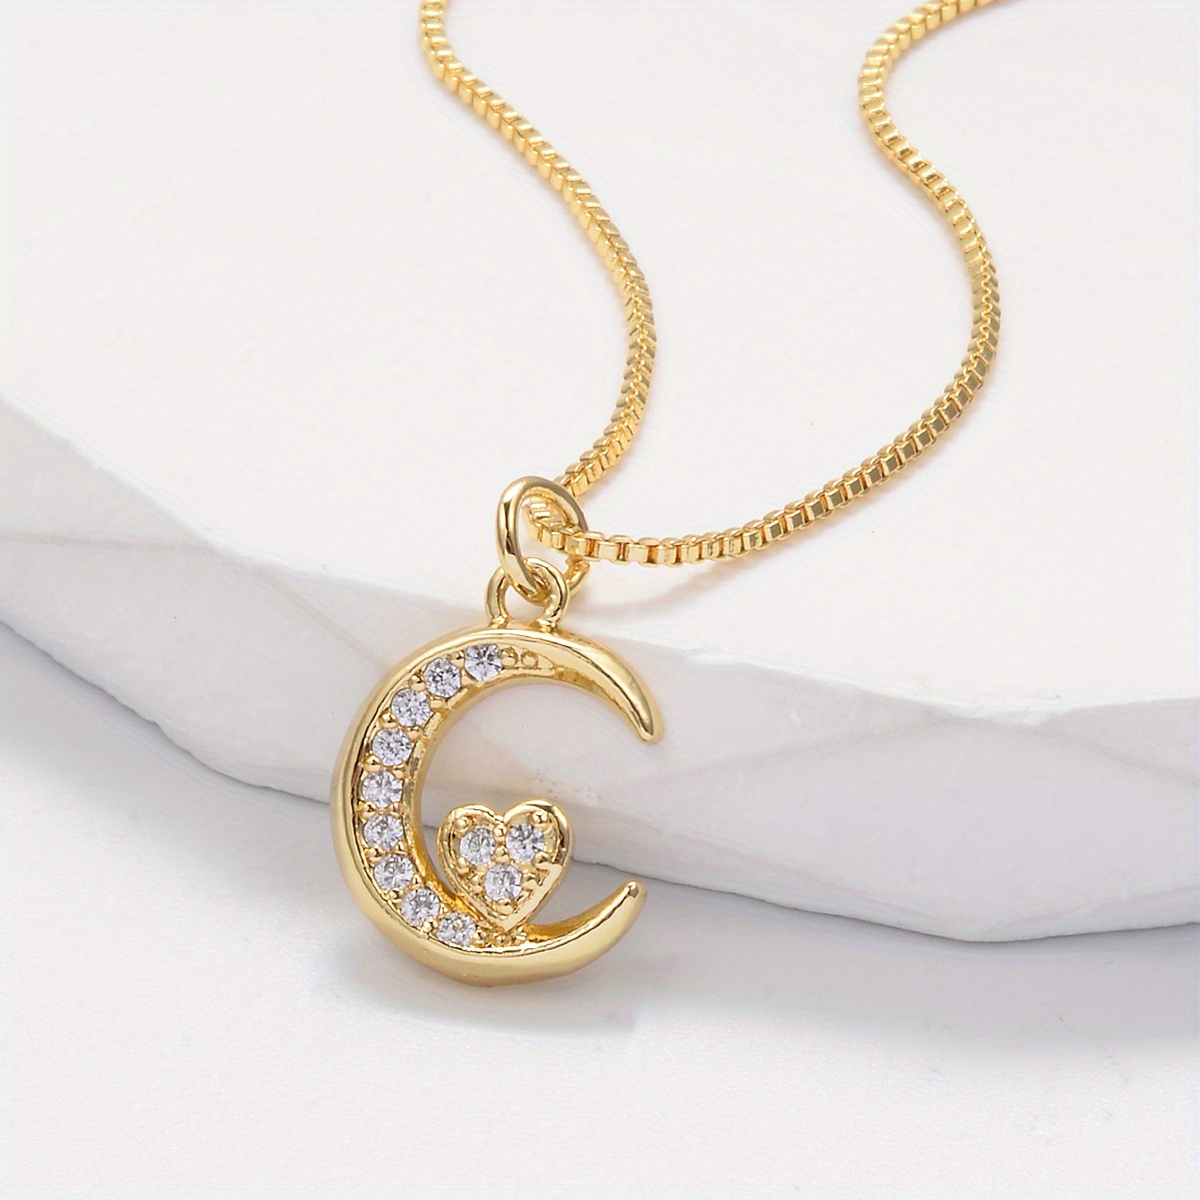 New Simple Cute Gold/Silver Plated Moon Necklace Pendant Chain Dainty Moon  Necklace Cresecent Moon Necklace Sweet Elegant Women Party Wedding Jewelry  Accessories